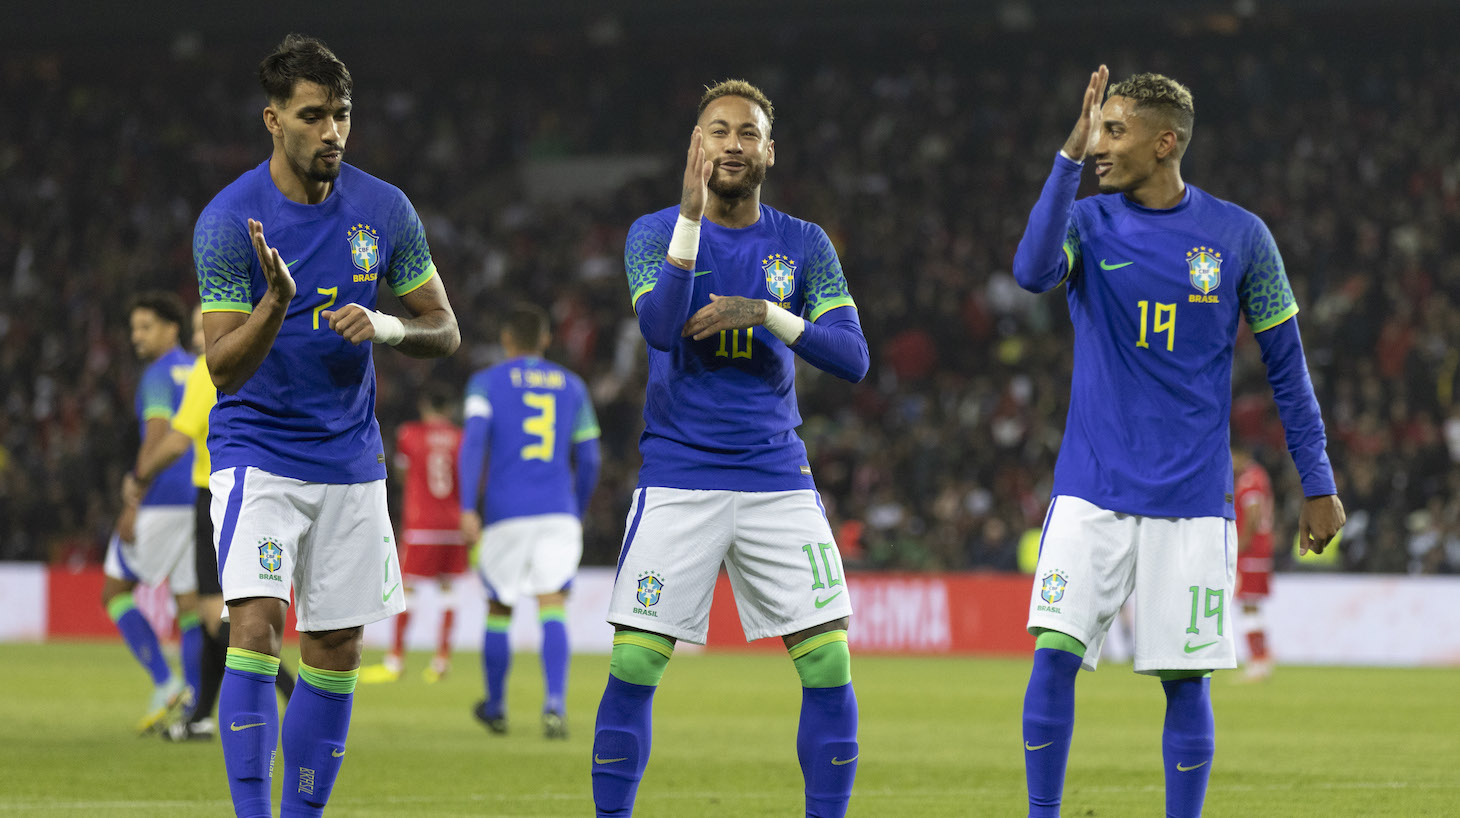 Neymar Jr of Brazil celebrates after scoring their side's third goal with his teammates Raphinha and Lucas Paqueta during the international friendly match between Brazil and Tunisia at Parc des Princes on September 27, 2022 in Paris, France.